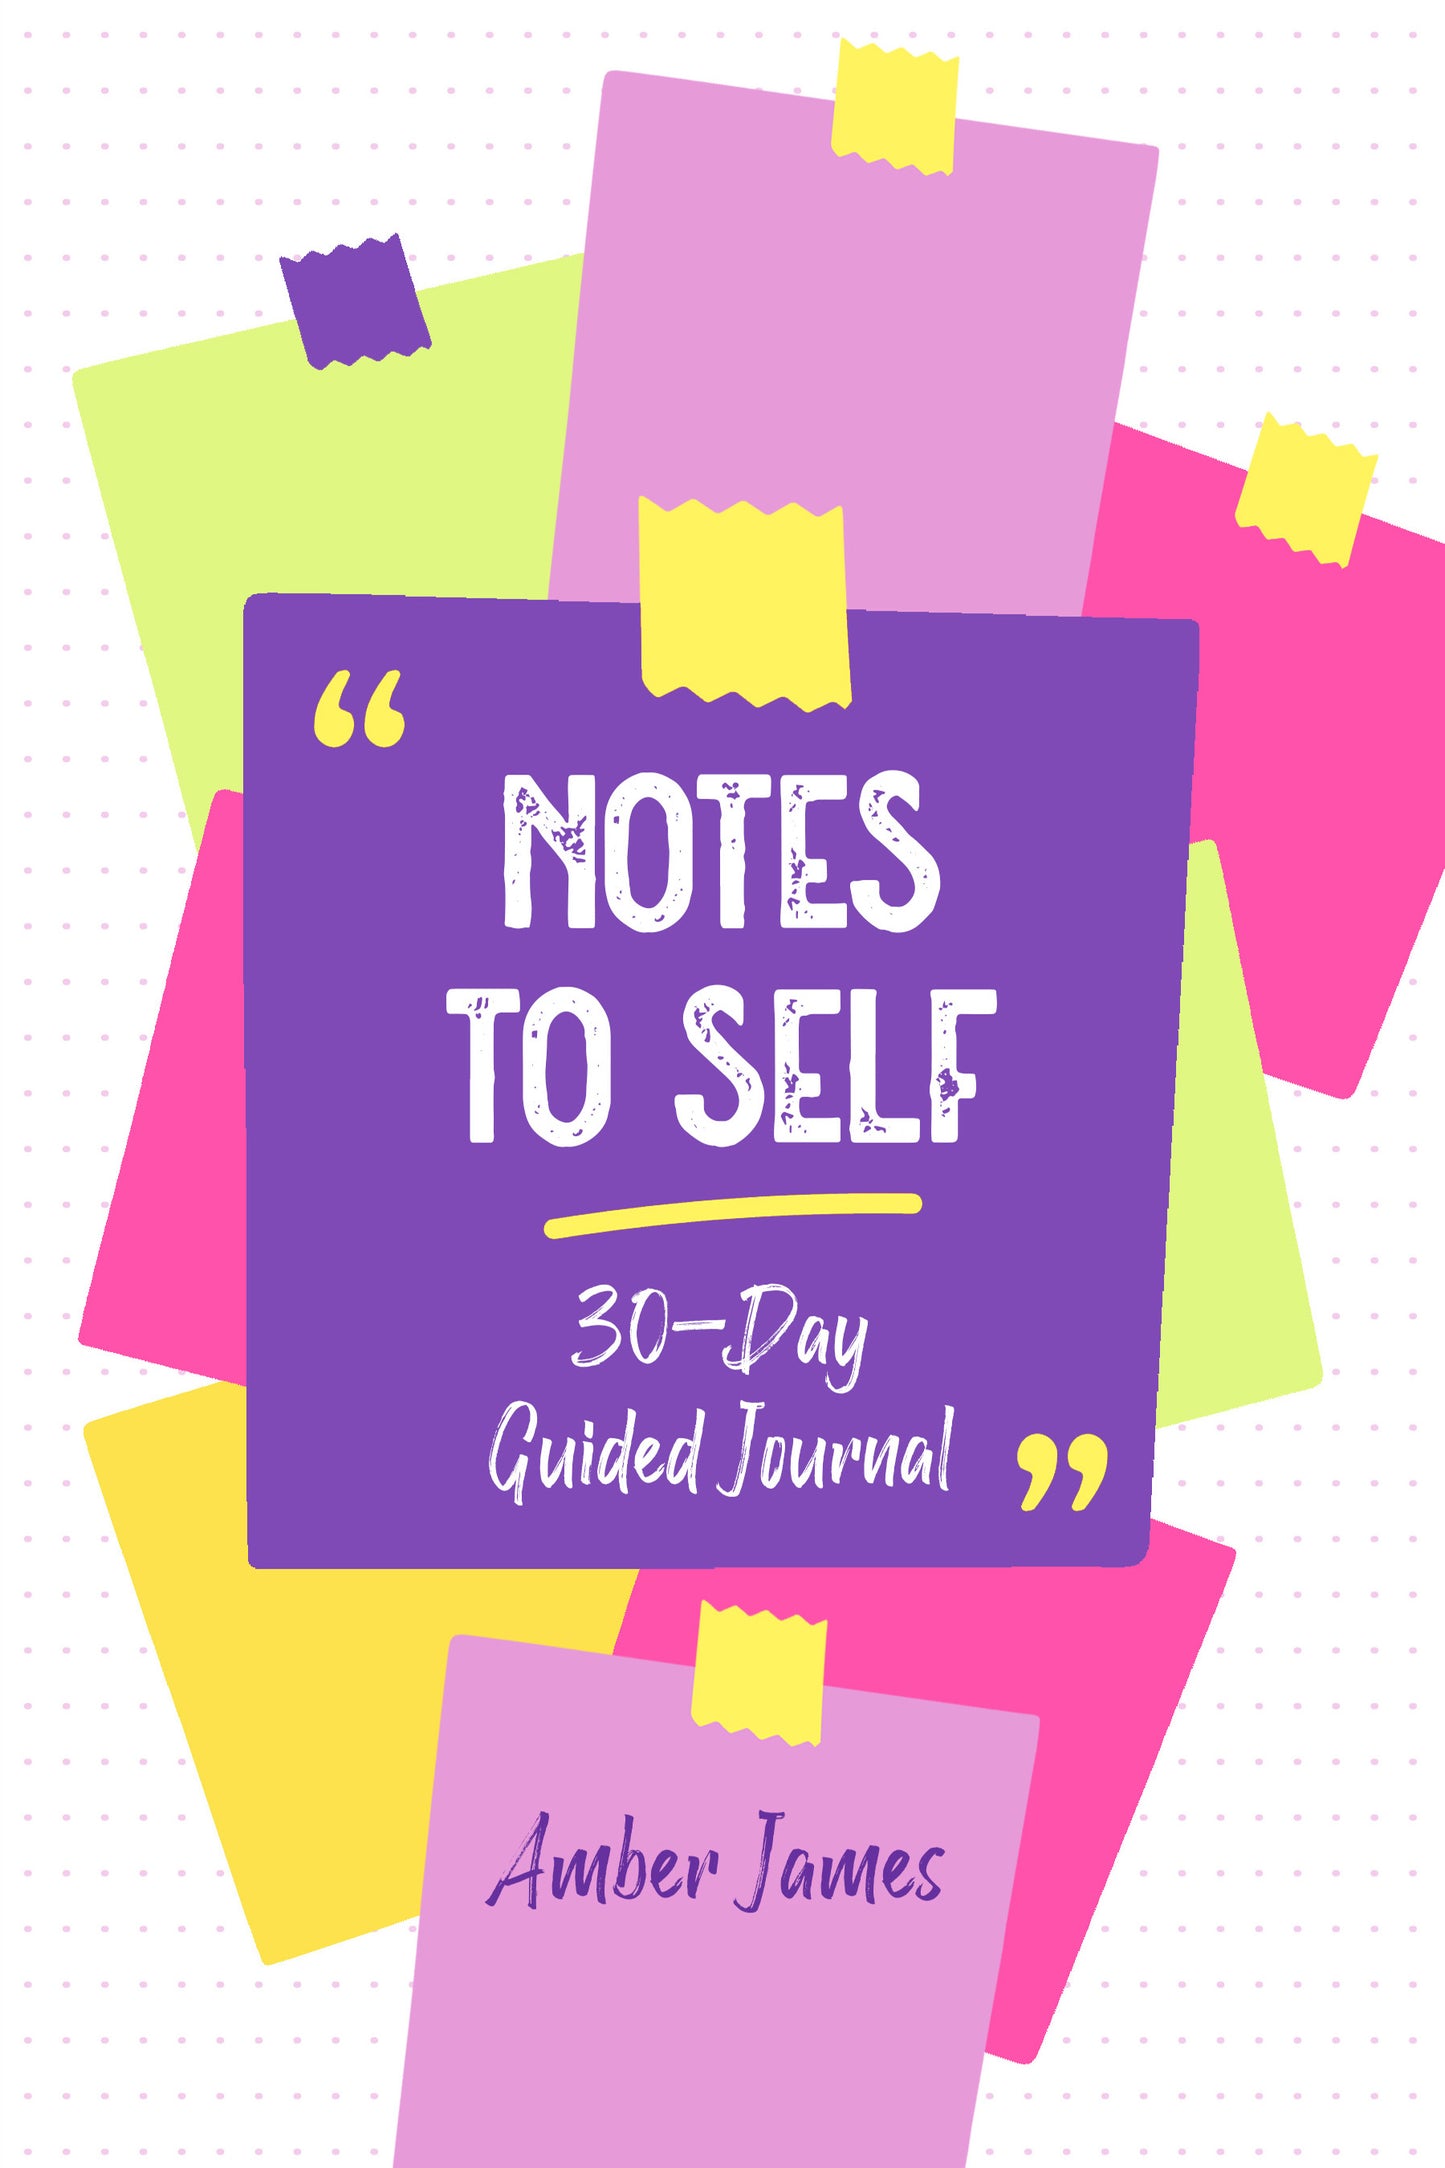 Notes To Self: 30-Day Guided Journal by Amber James (Paperback)